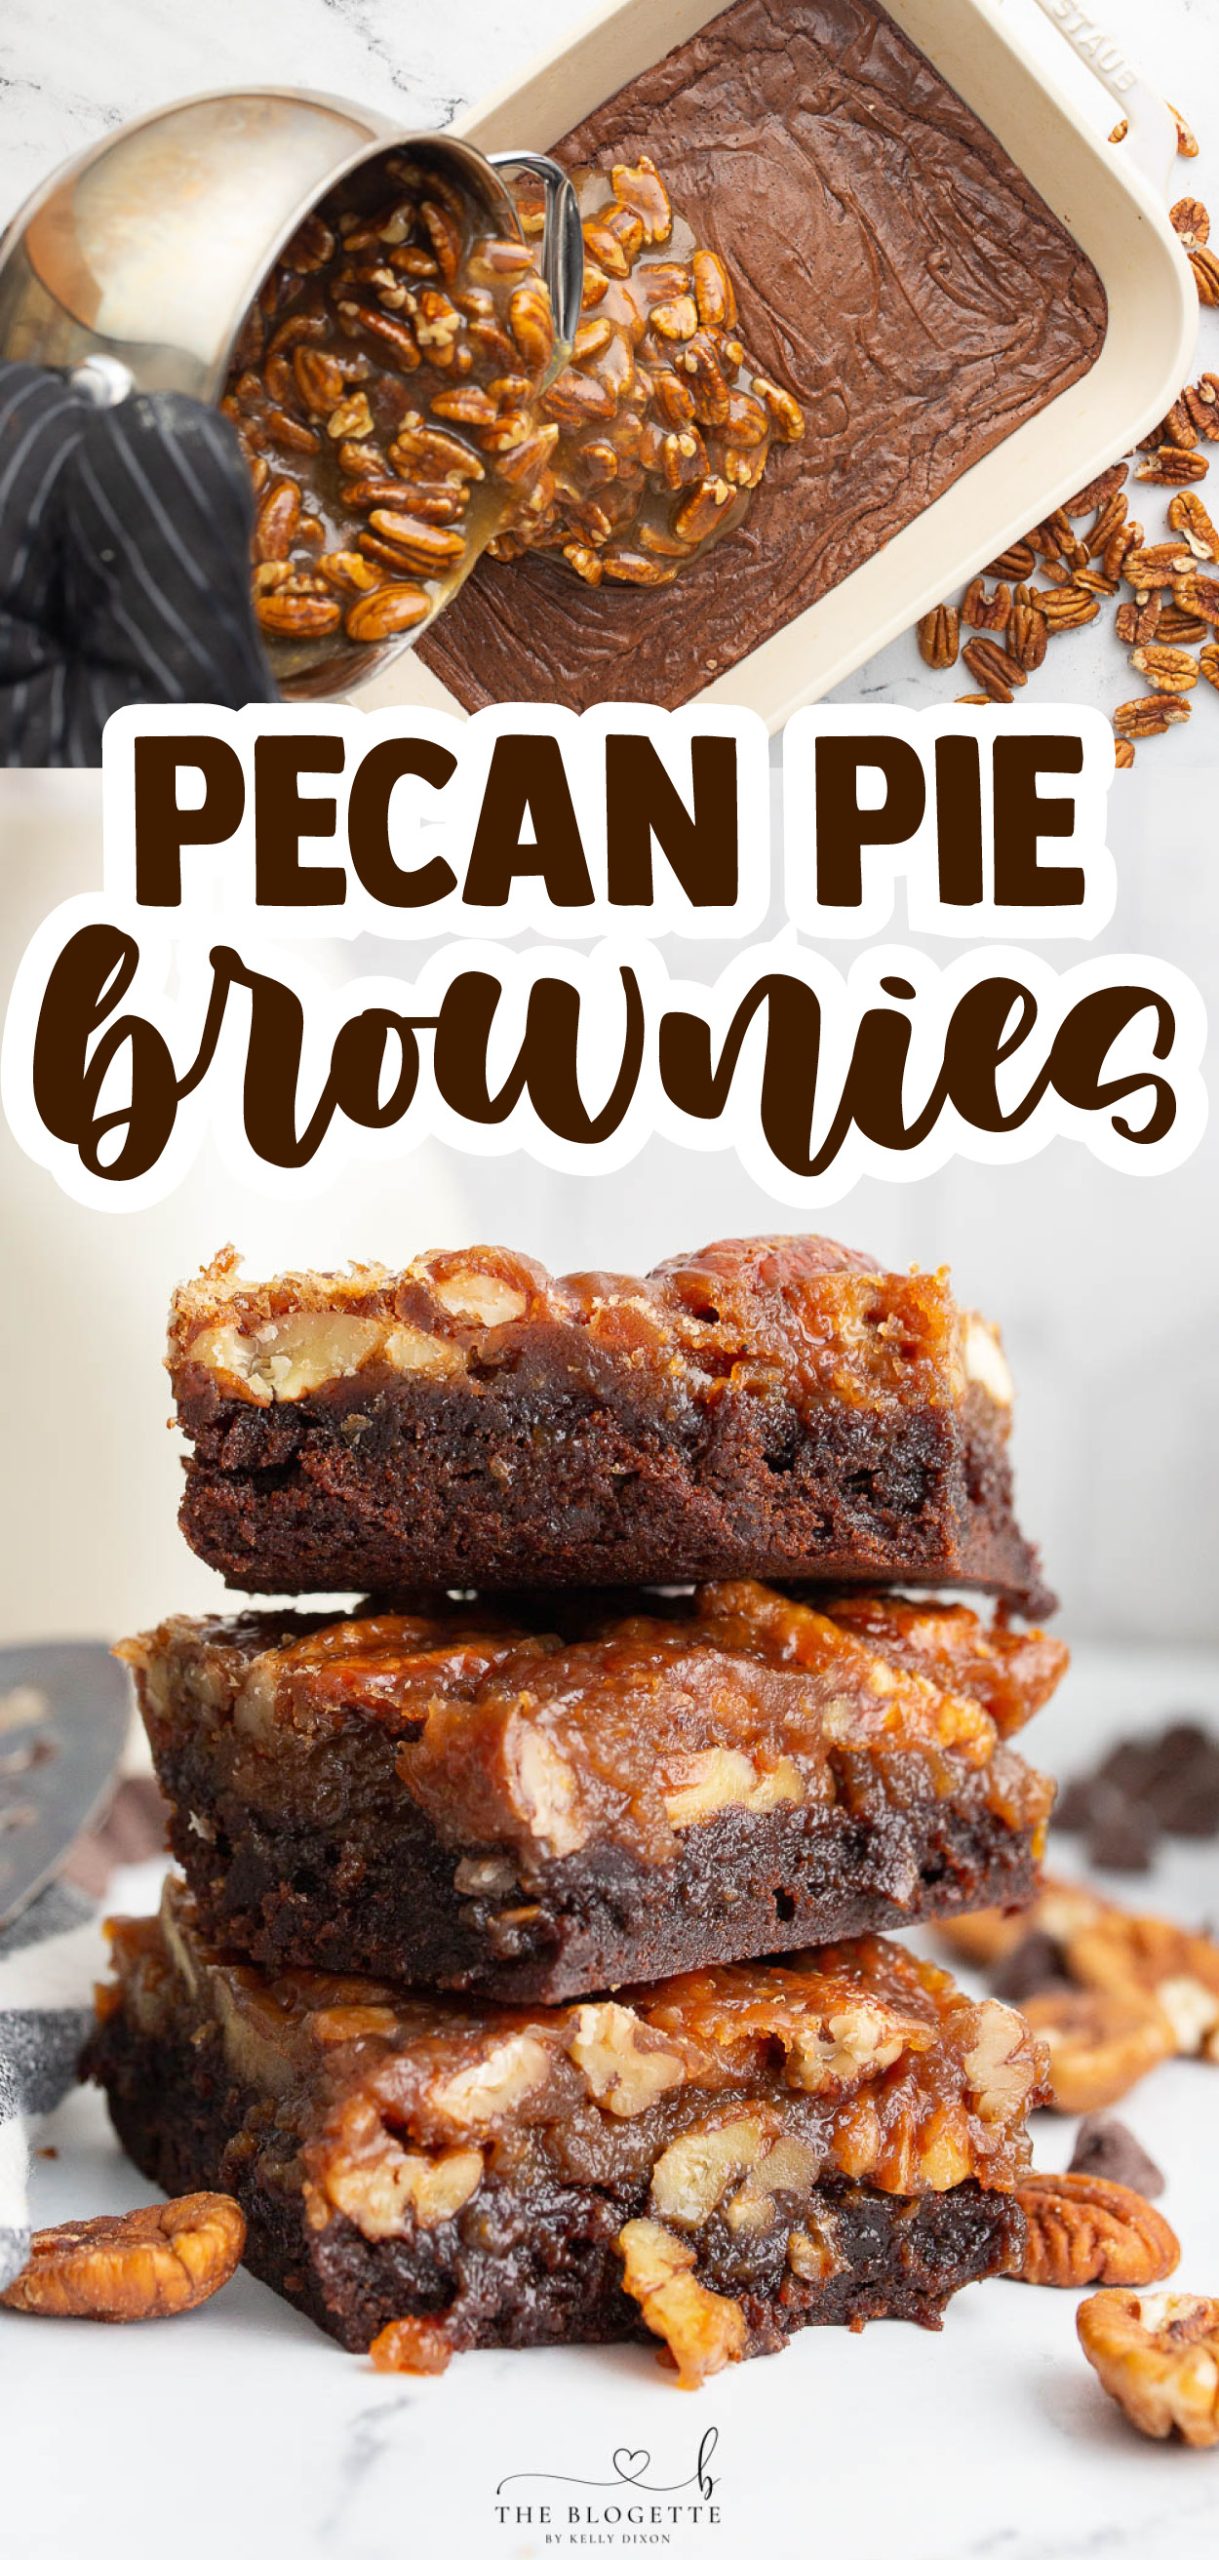 Pecan Pie Brownies are fudgy chocolate brownies topped with a pecan pie filling for an irresistible treat. This is a Thanksgiving dessert FAVORITE but is delicious all year long.